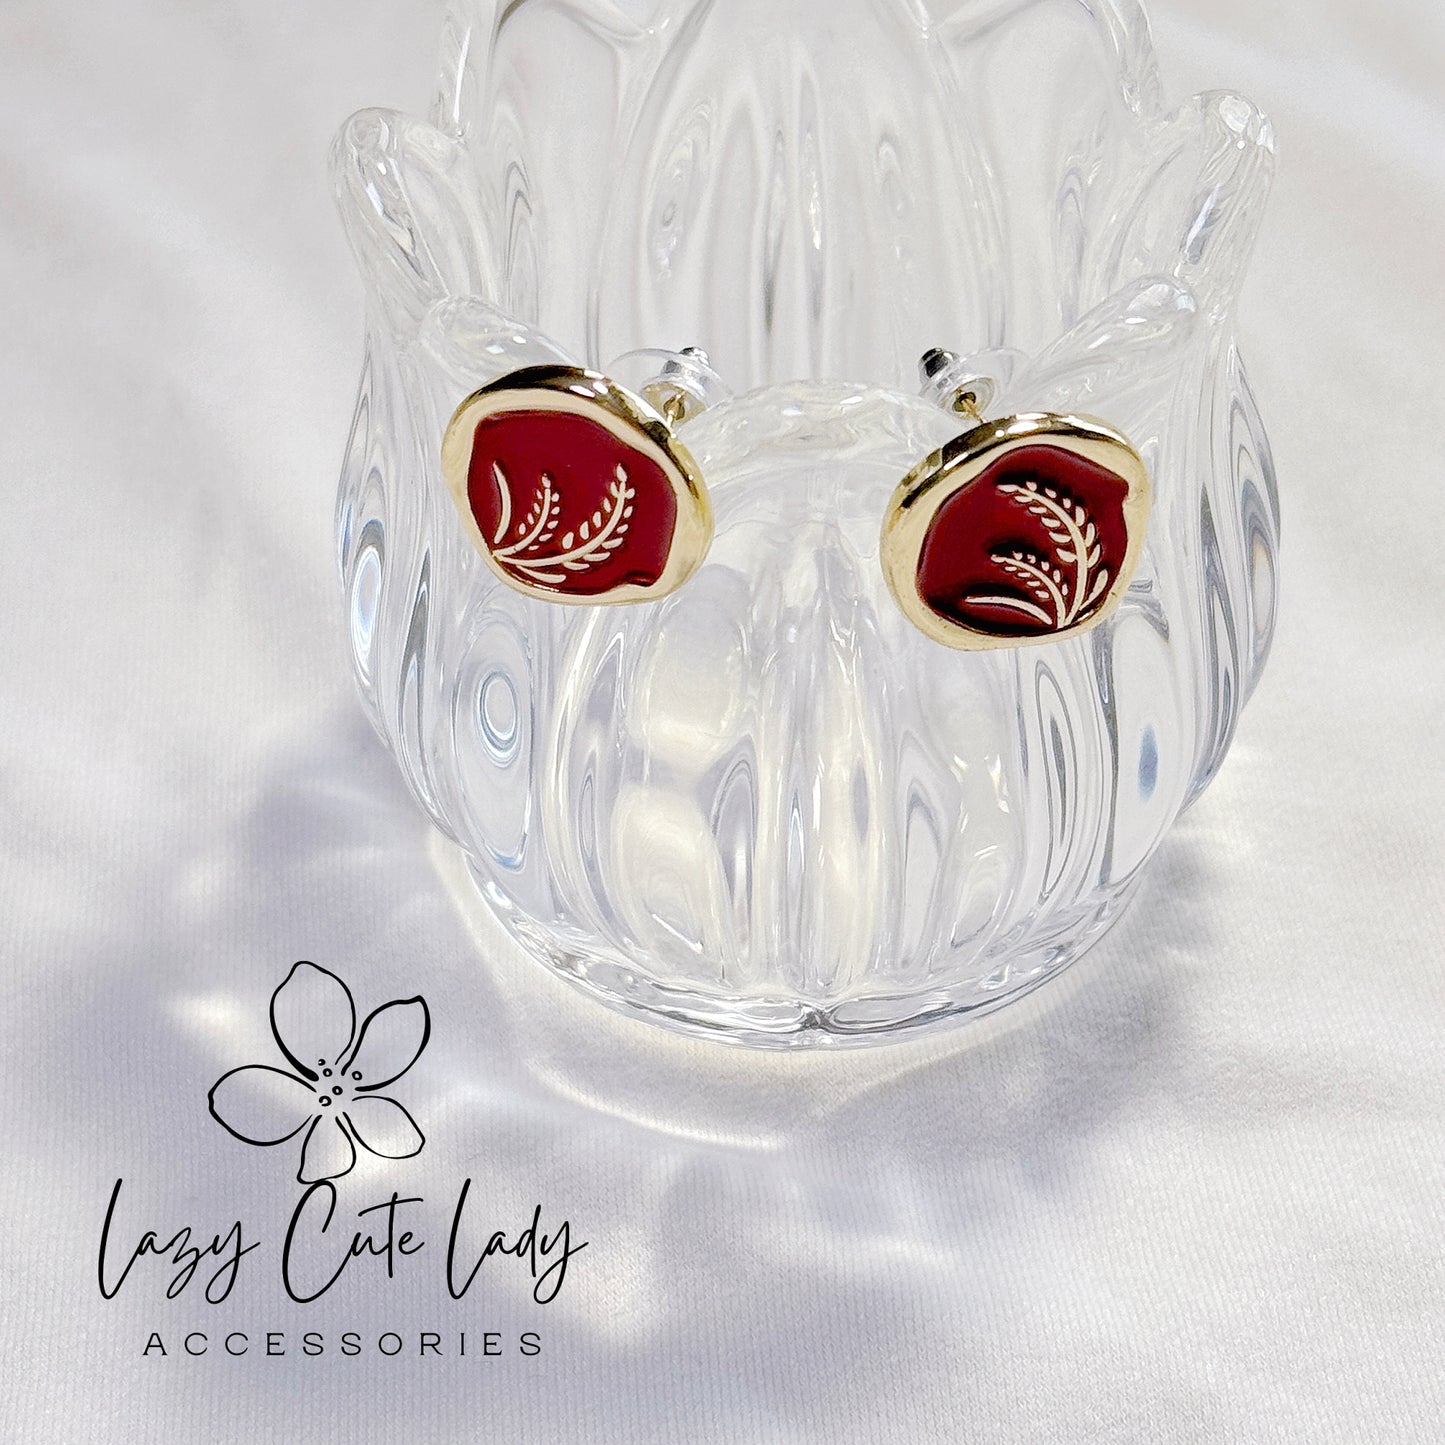 Vintage Wheat-themed Earrings in Gold, Available in Brown and Deep Red Variants